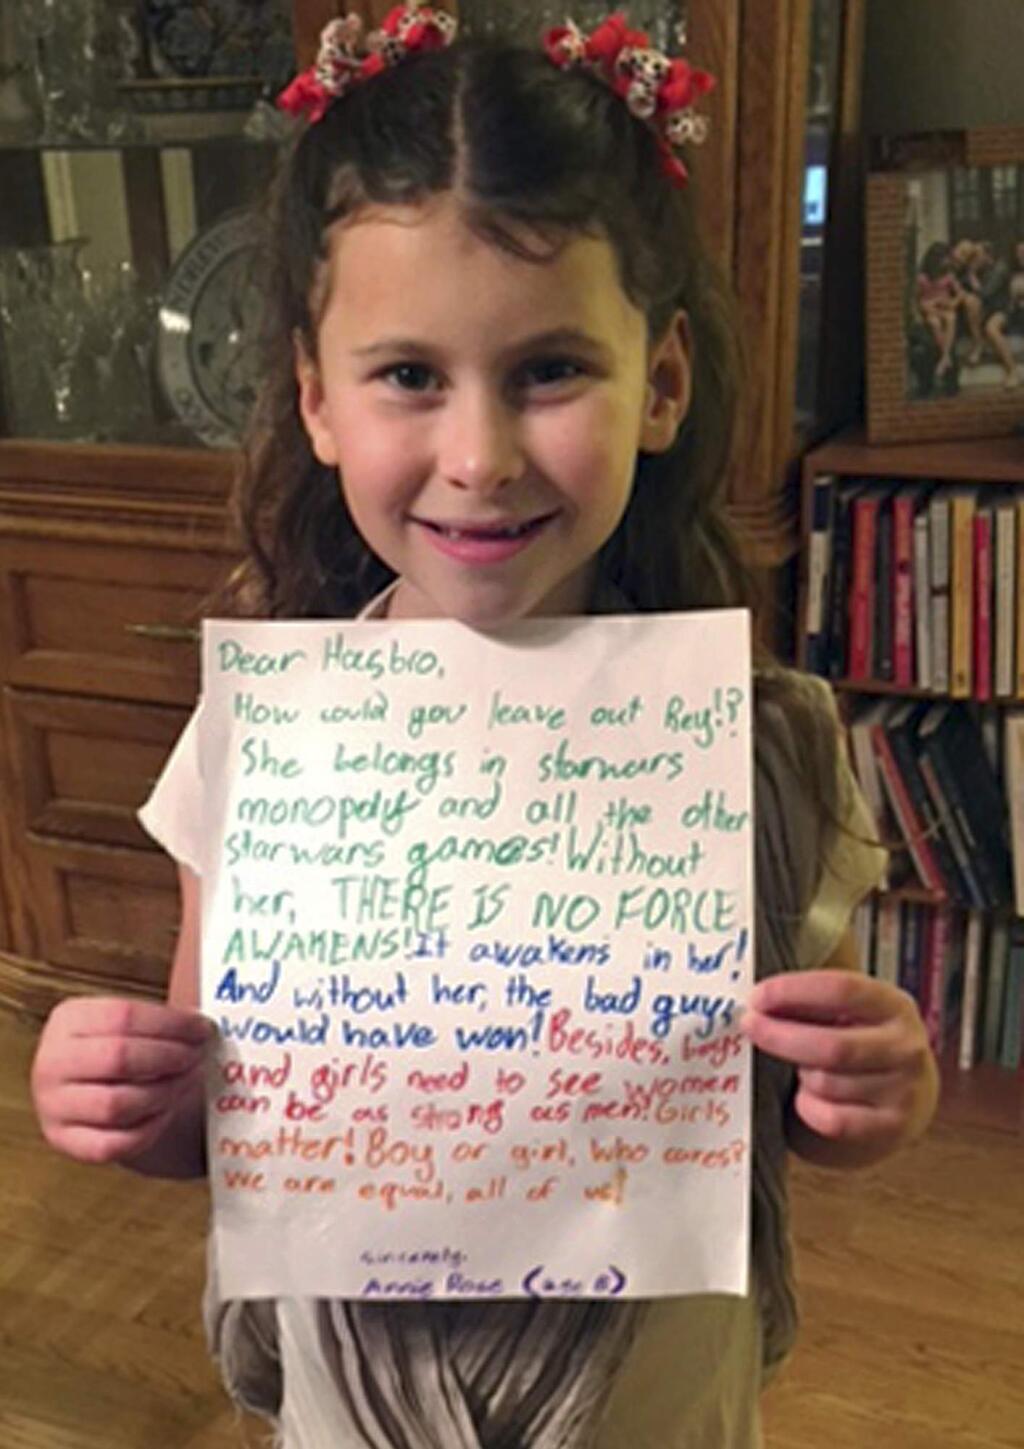 In this January 2016 photo provided by Carrie Goldman, her daughter, Annie Rose, holds a letter in Evanston, Ill., that she wrote to Hasbro asking why the female character Rey was omitted from a Monopoly set based on 'Star Wars: The Force Awakens,' when she is a main character and crucial to the story. Hasbro responded that they would add Rey to a Star Wars version of Monopoly by the end of the year. Eighteen months later, Annie Rose and others are still waiting. (Carrie Goldman via AP)